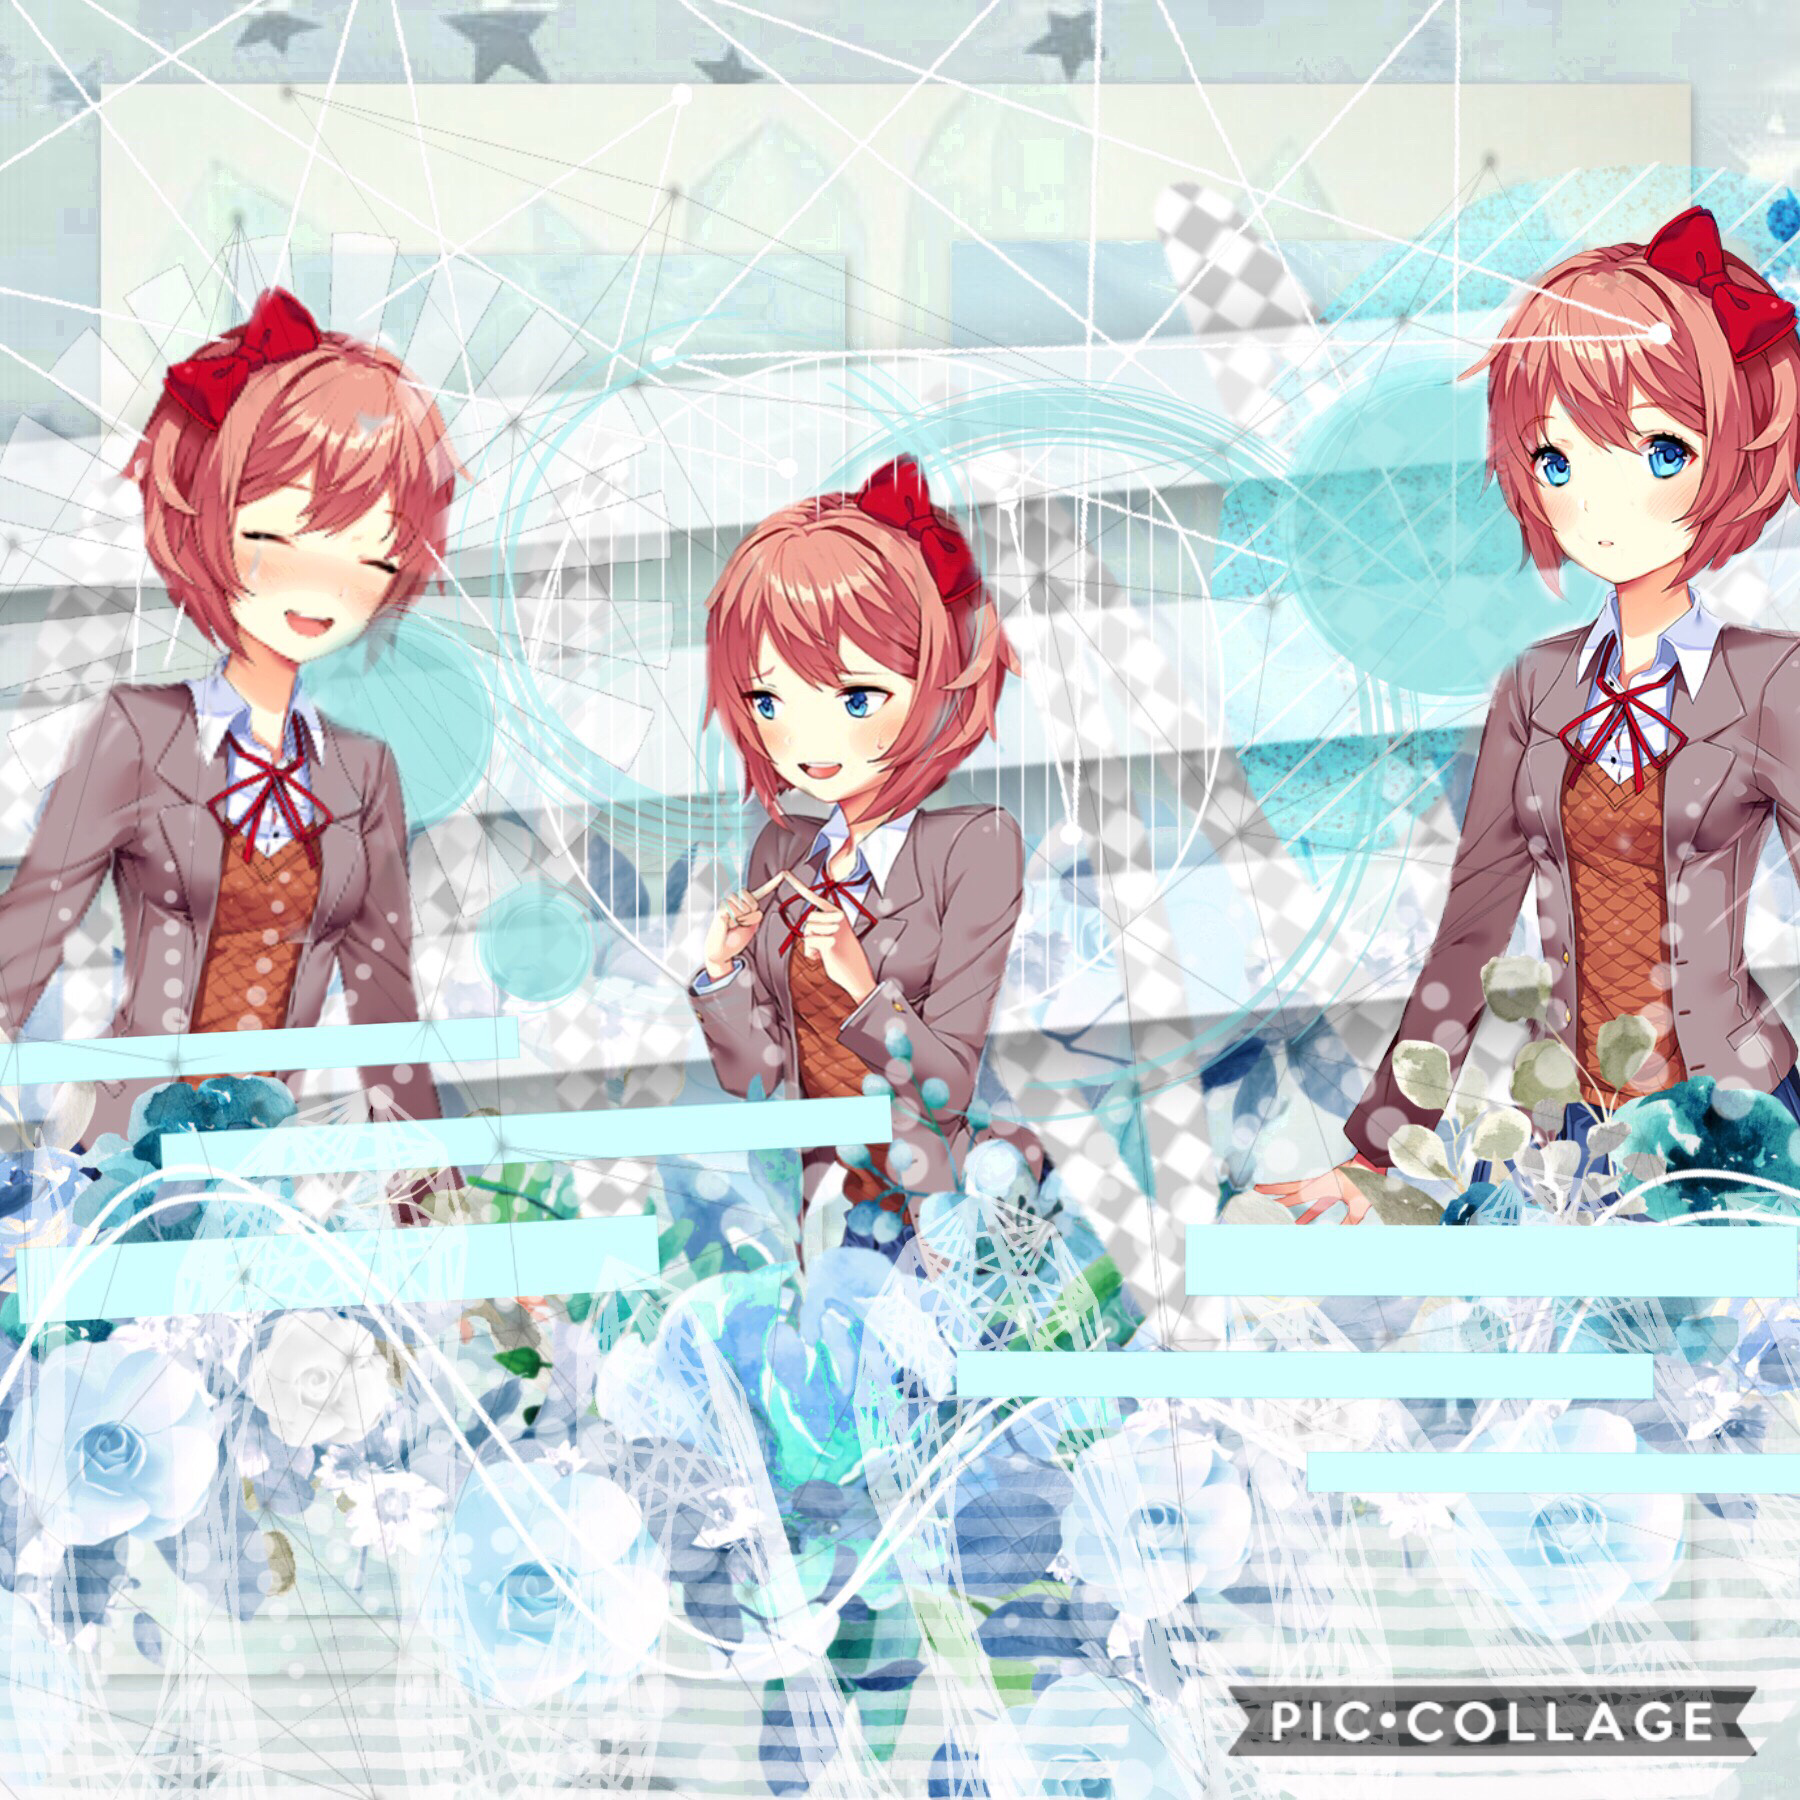 (Monika is best girl tho so idk why I made this 😅)